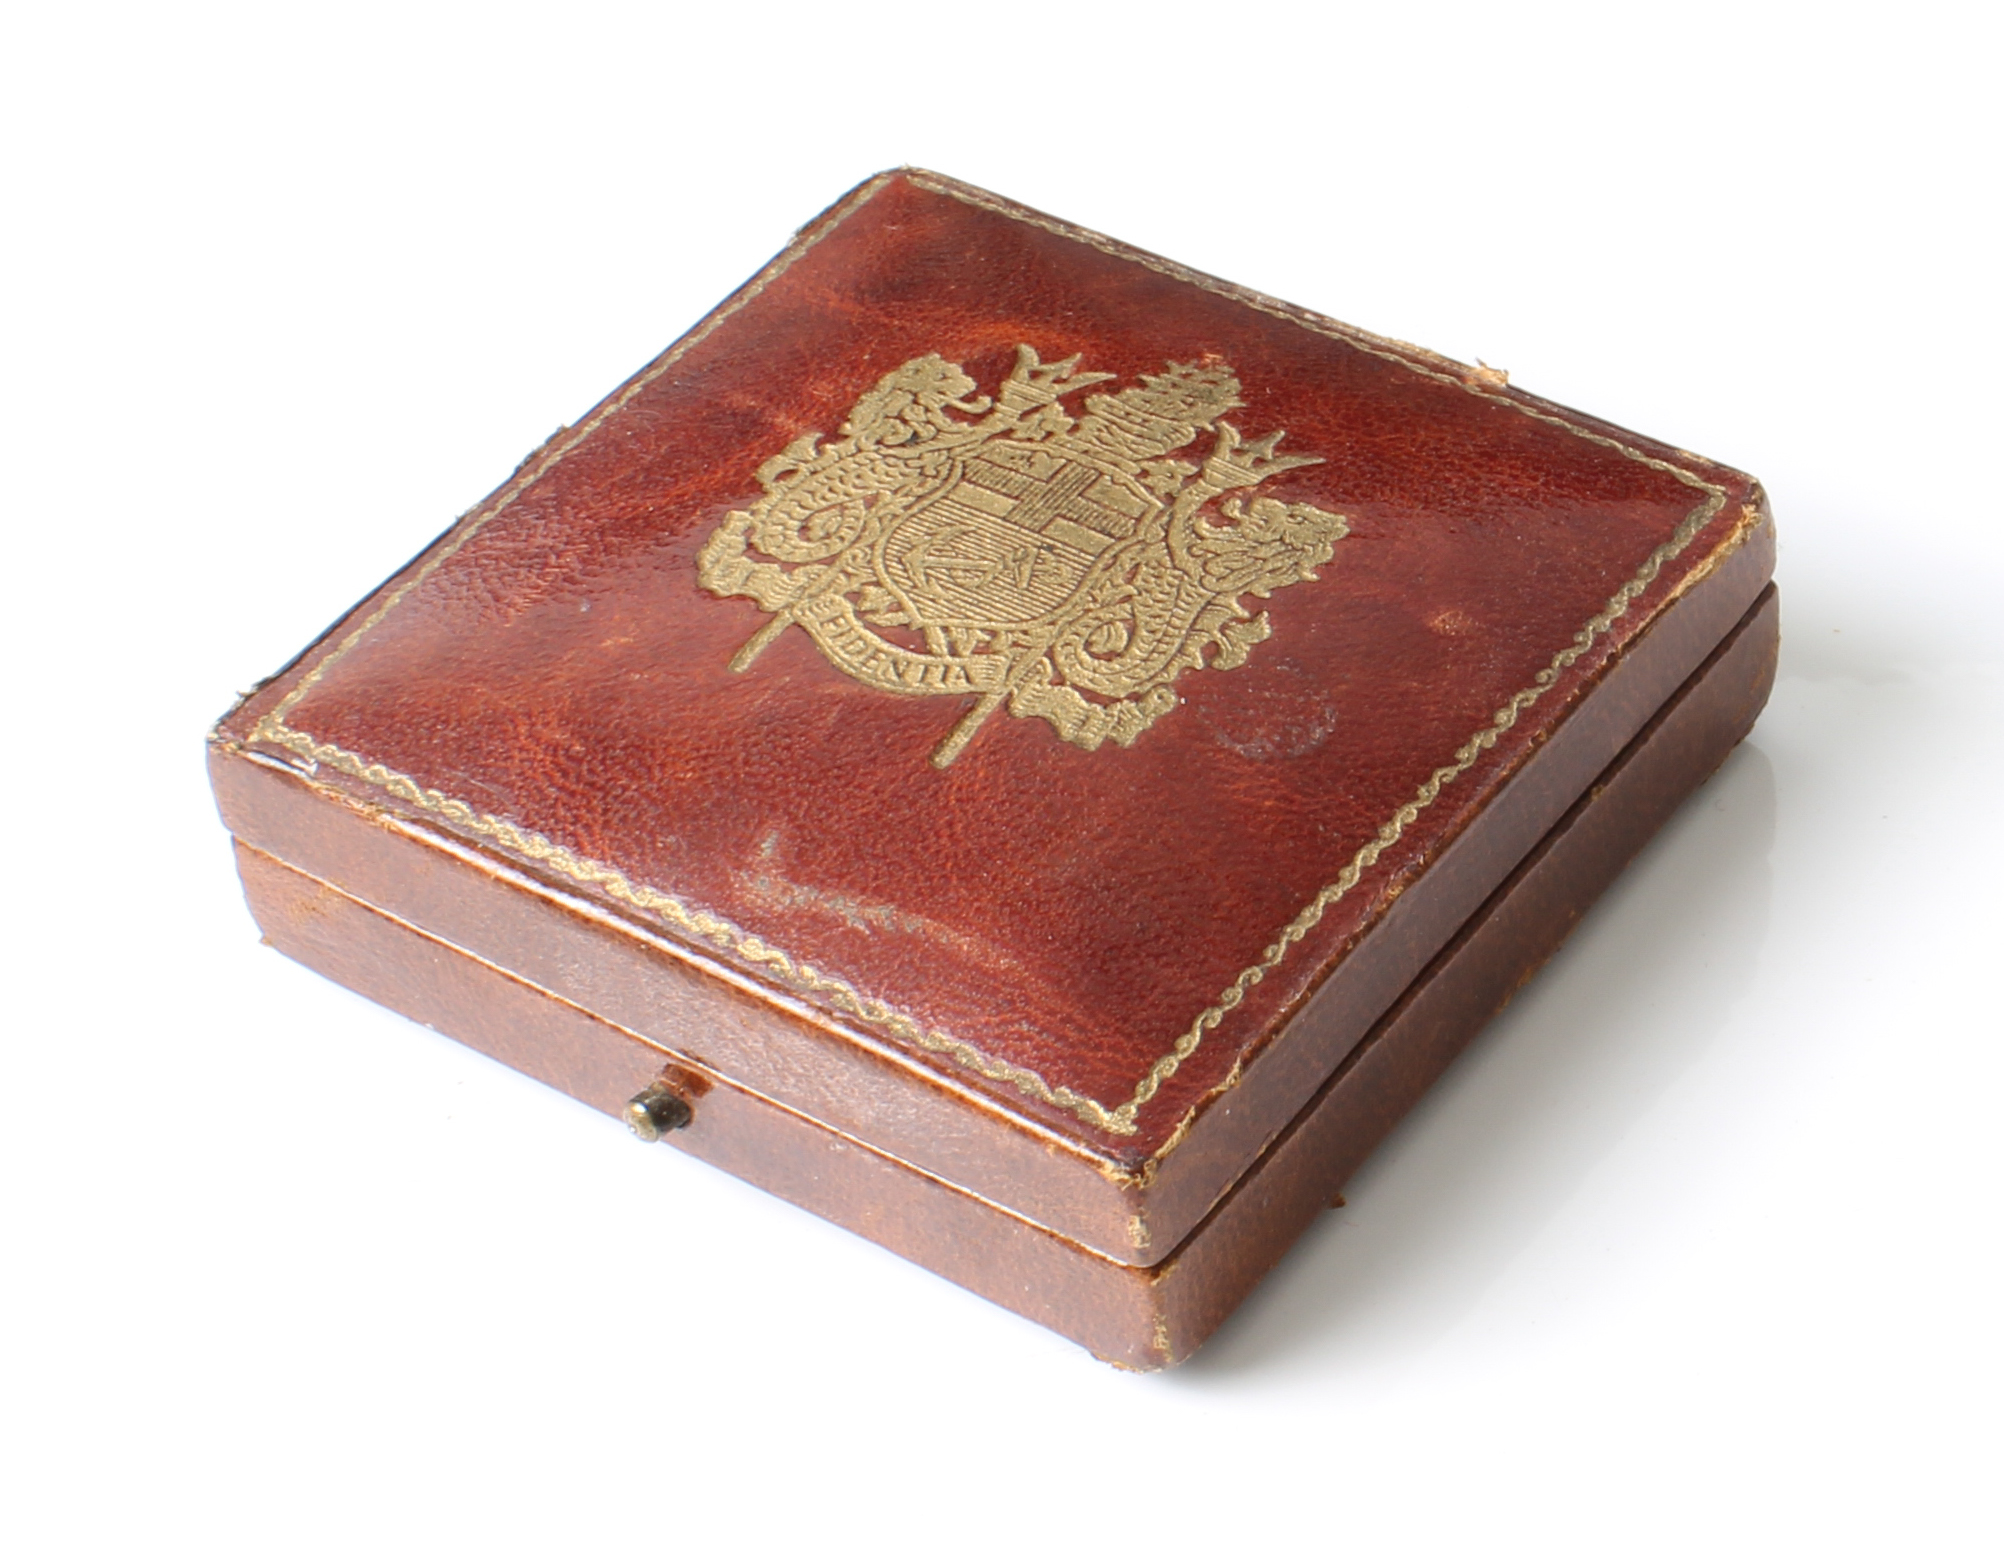 A 1907 gold sovereign in its Lloyd's of London gilt-tooled leather fitted case and complete with its - Image 6 of 6